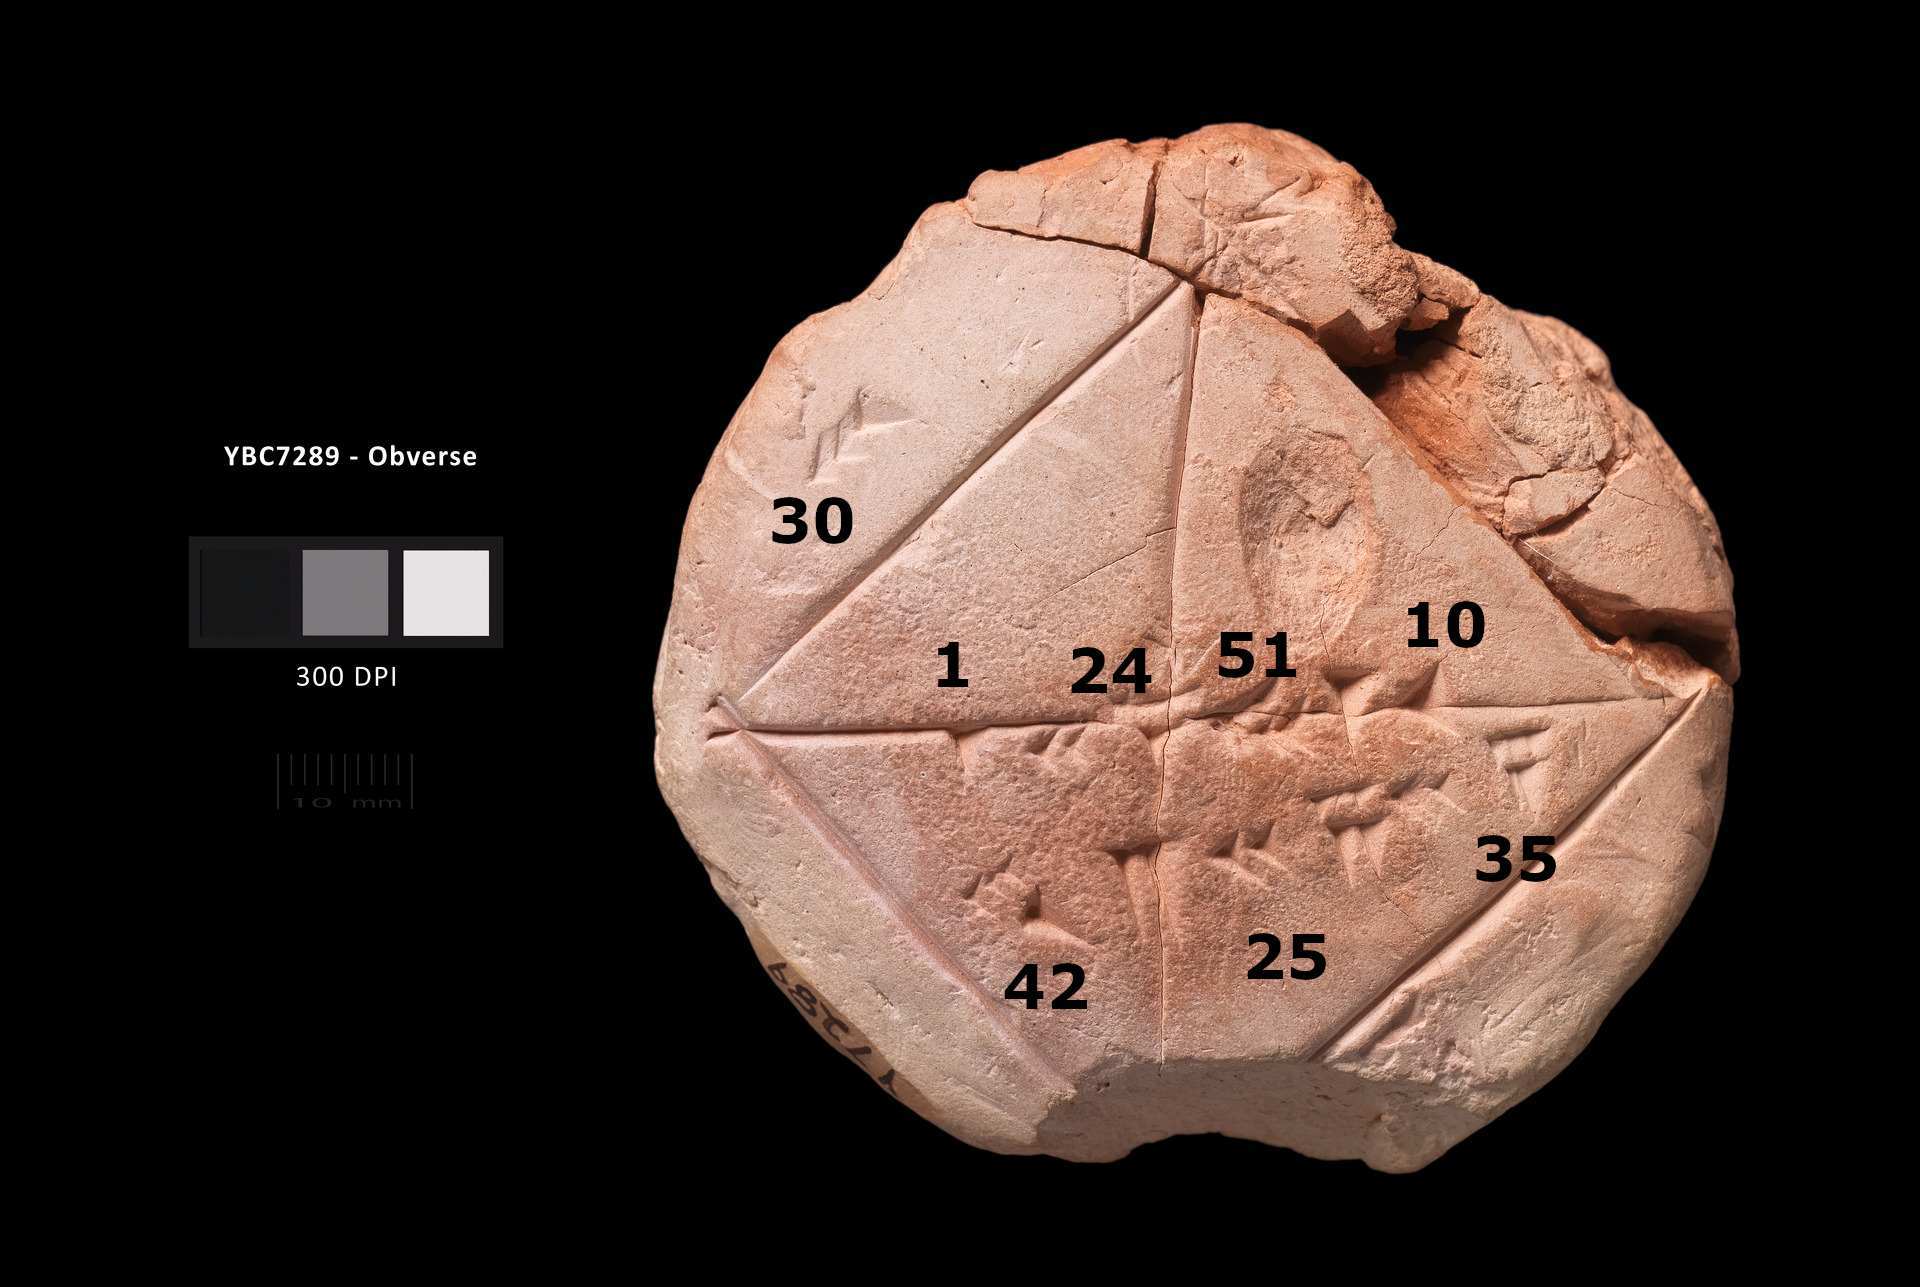 Labeled photograph of the Yale Babylonian Collection's Tablet YBC 7289